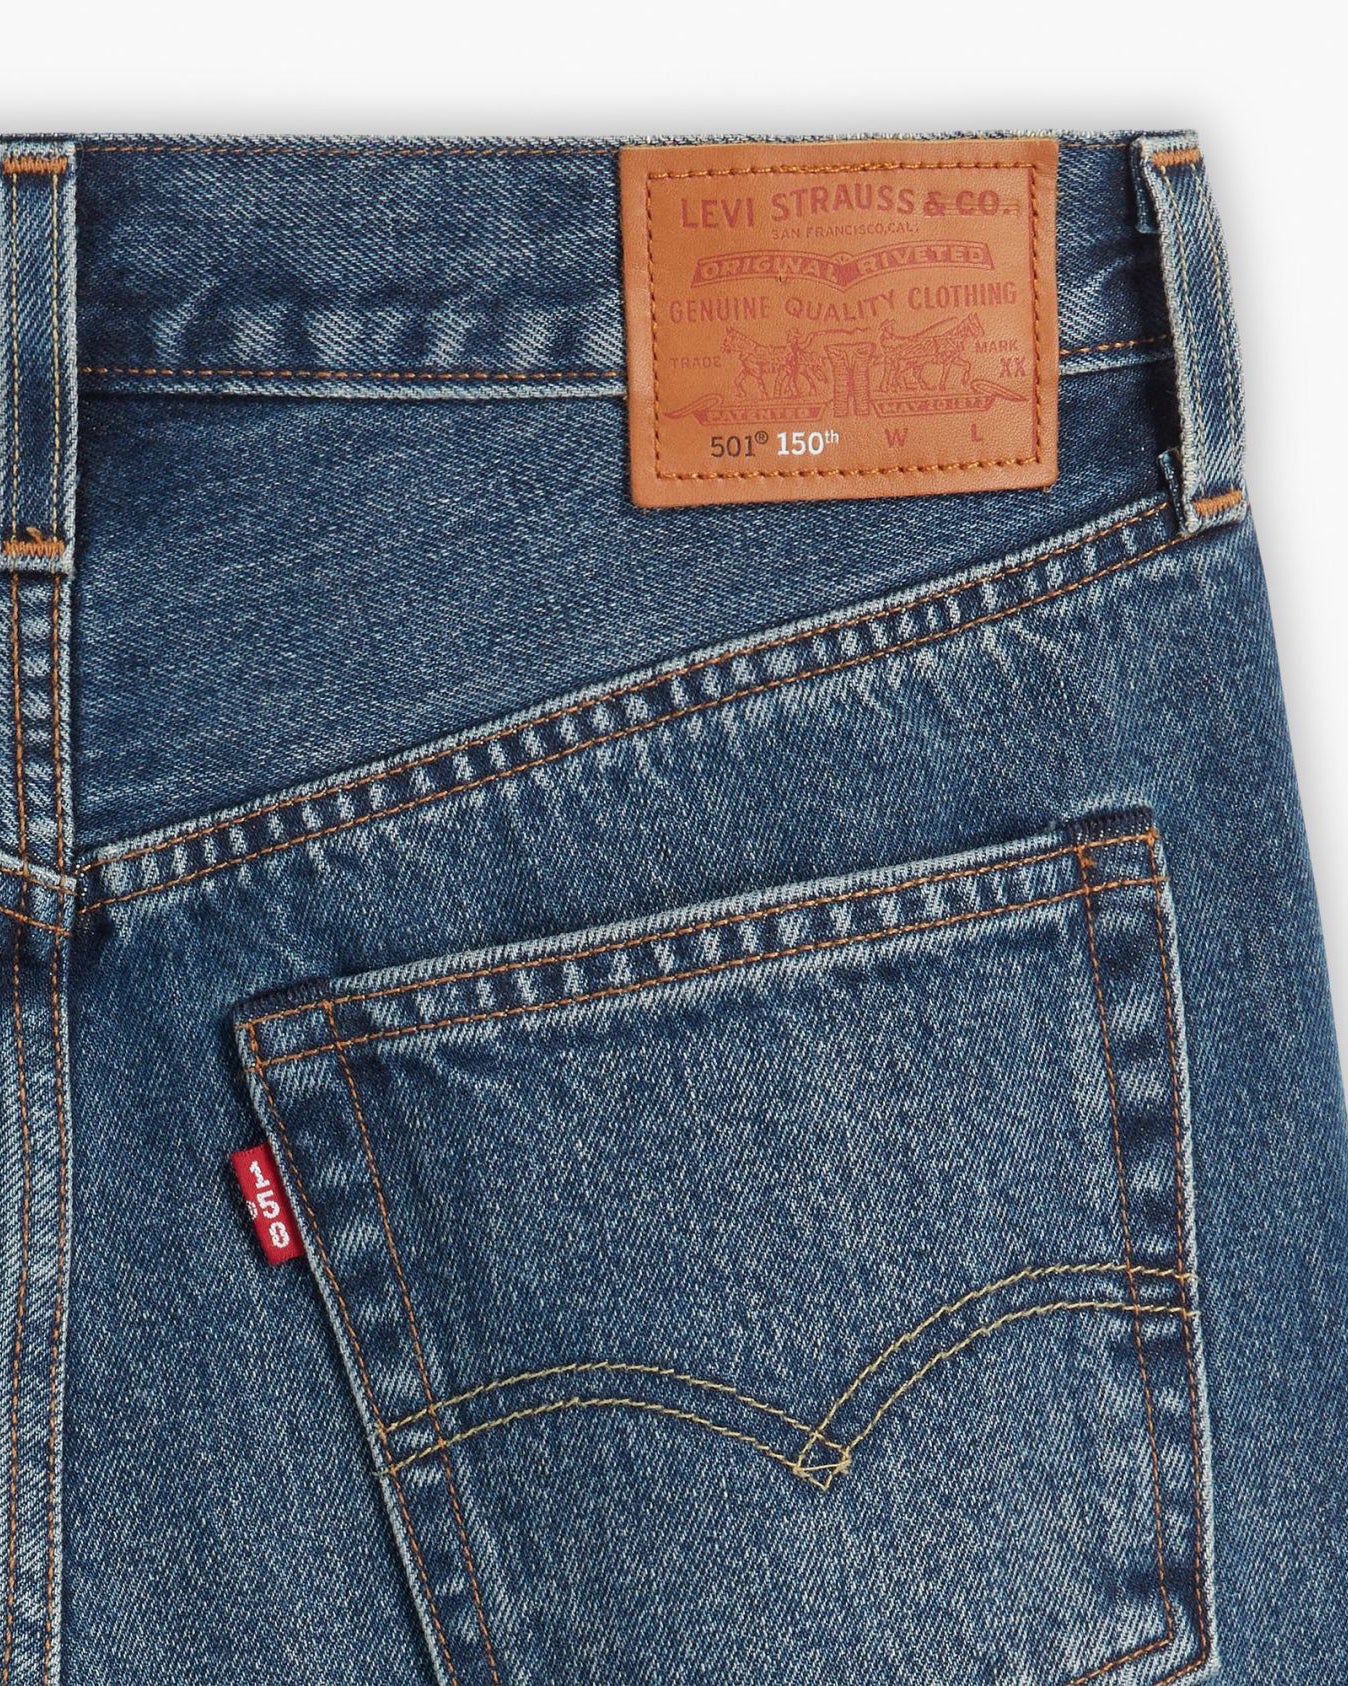 Levi's® 501 Jeans For Women - Gold Digging Selvedge – JEANSTORE